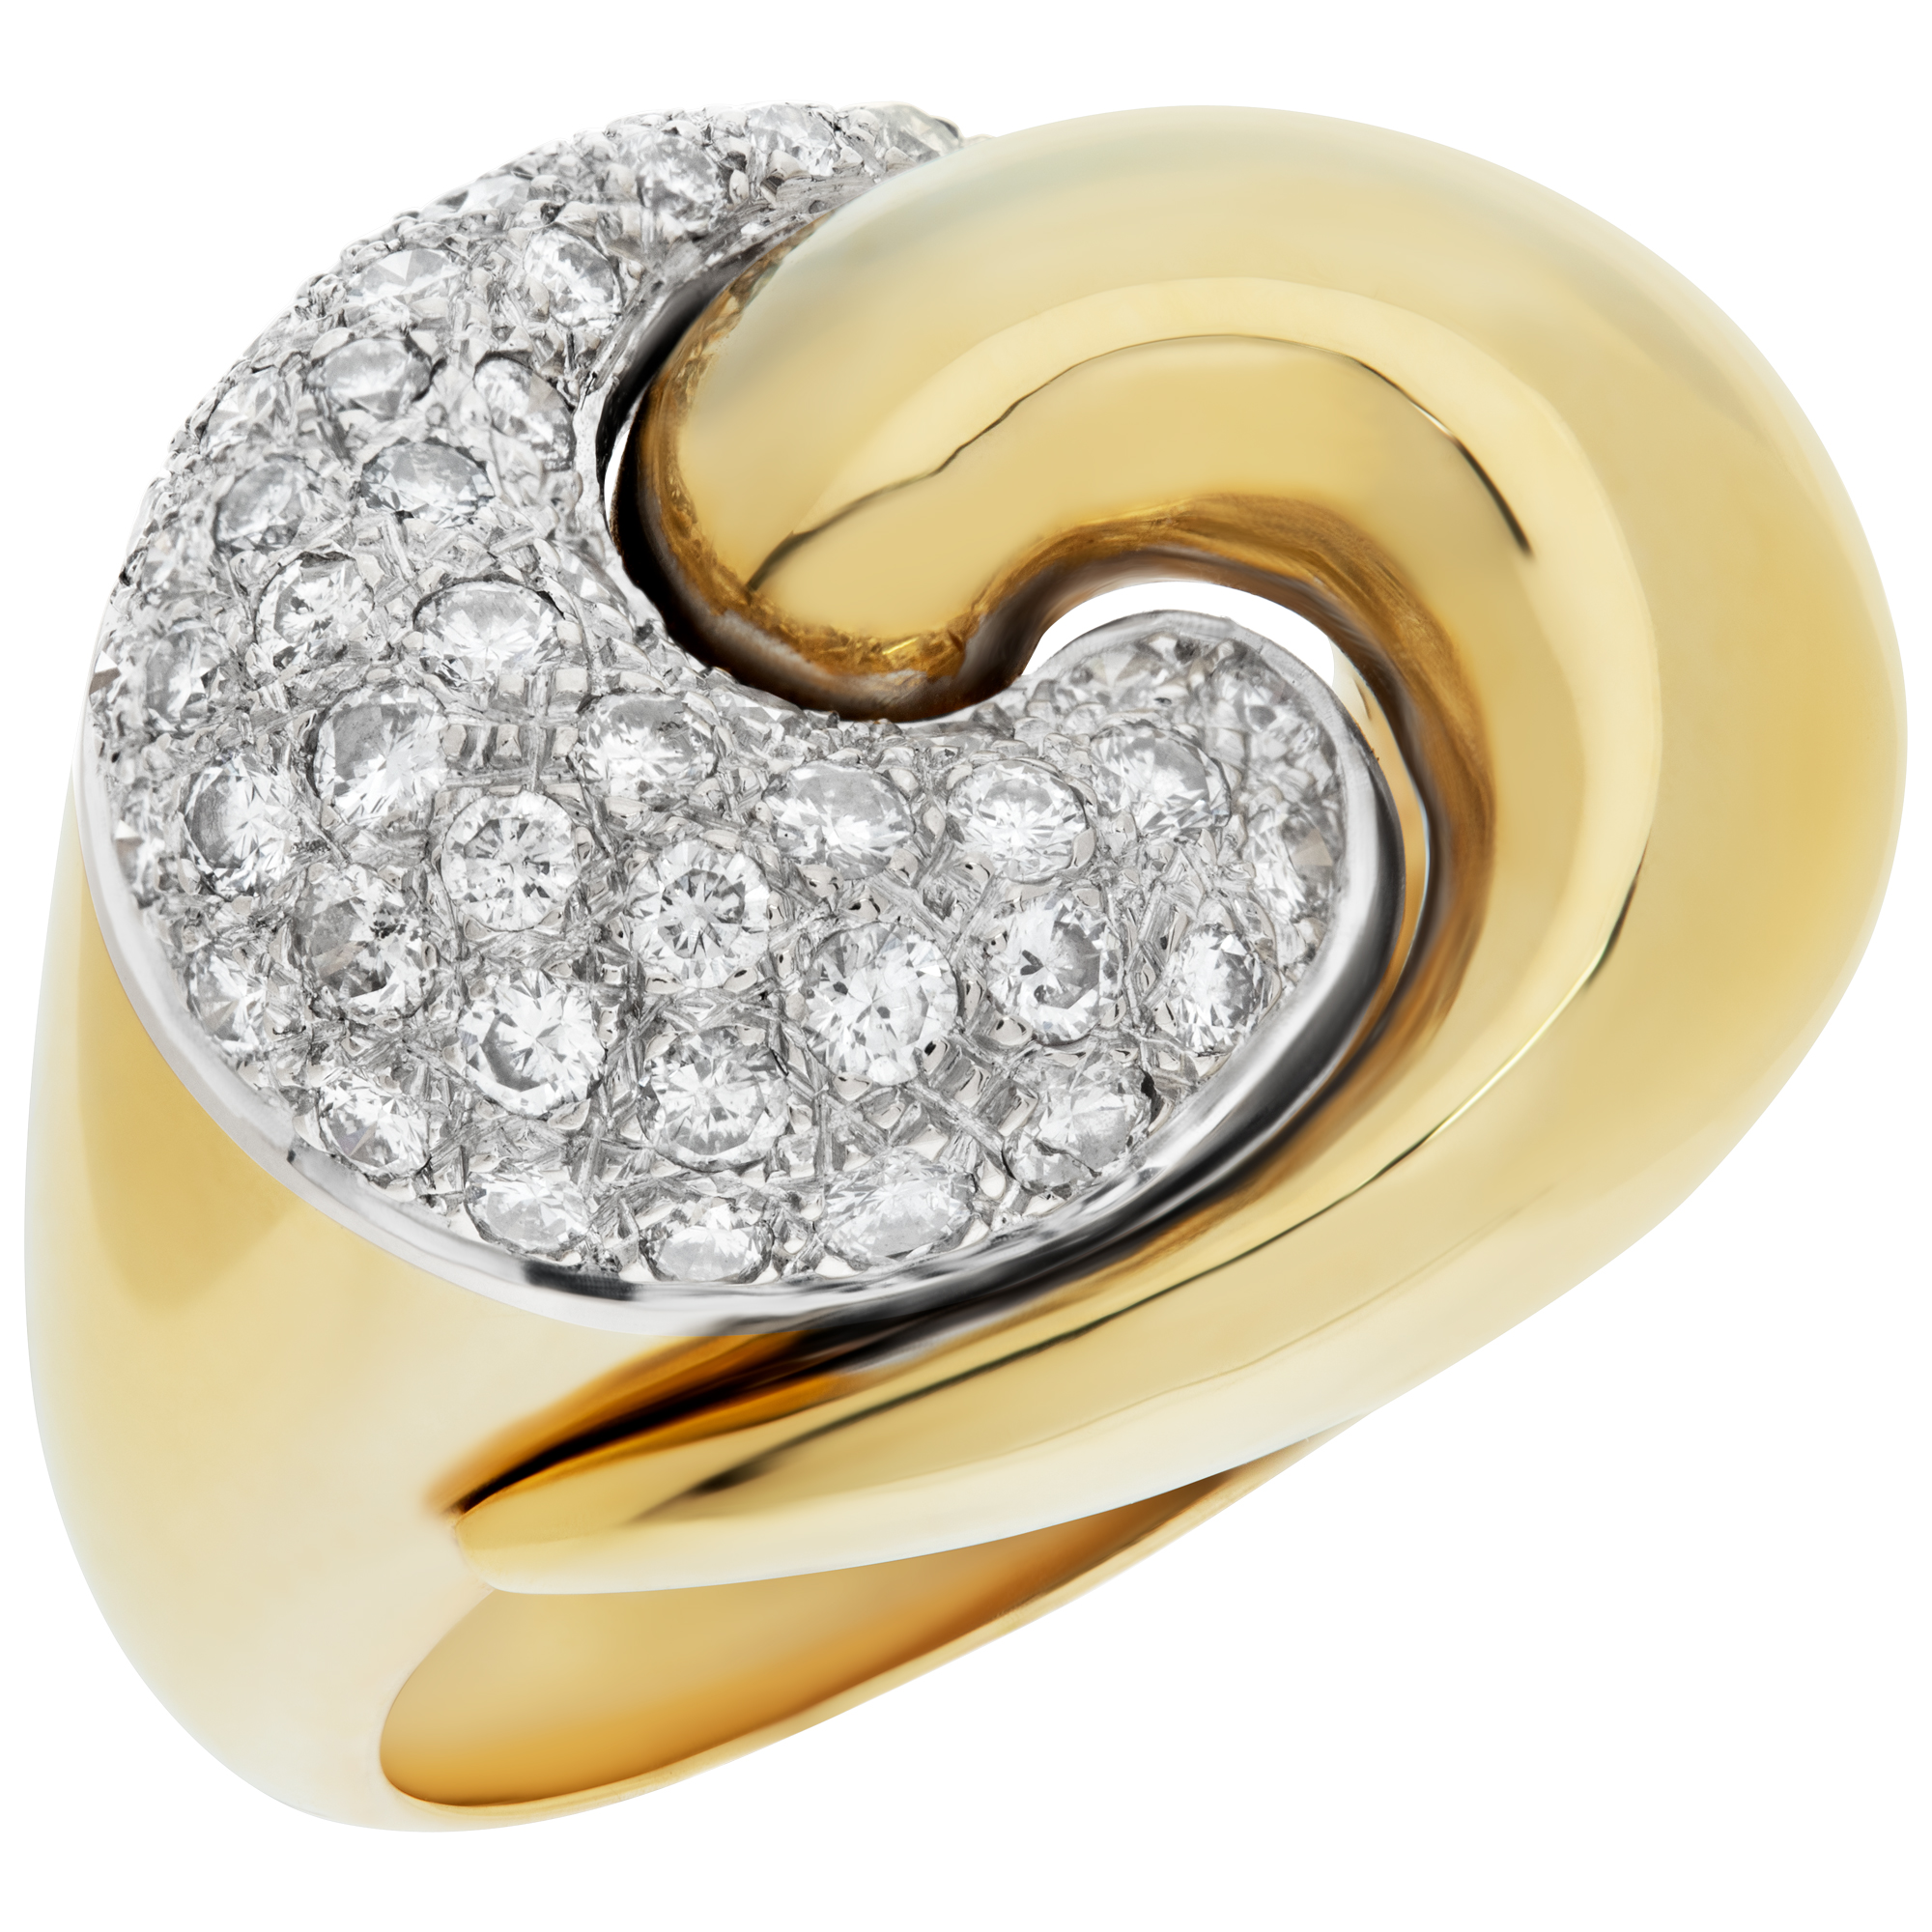 Pave diamond ring in 18k yellow gold with approximately 1.00 carat round brilliant cut diamonds. image 3